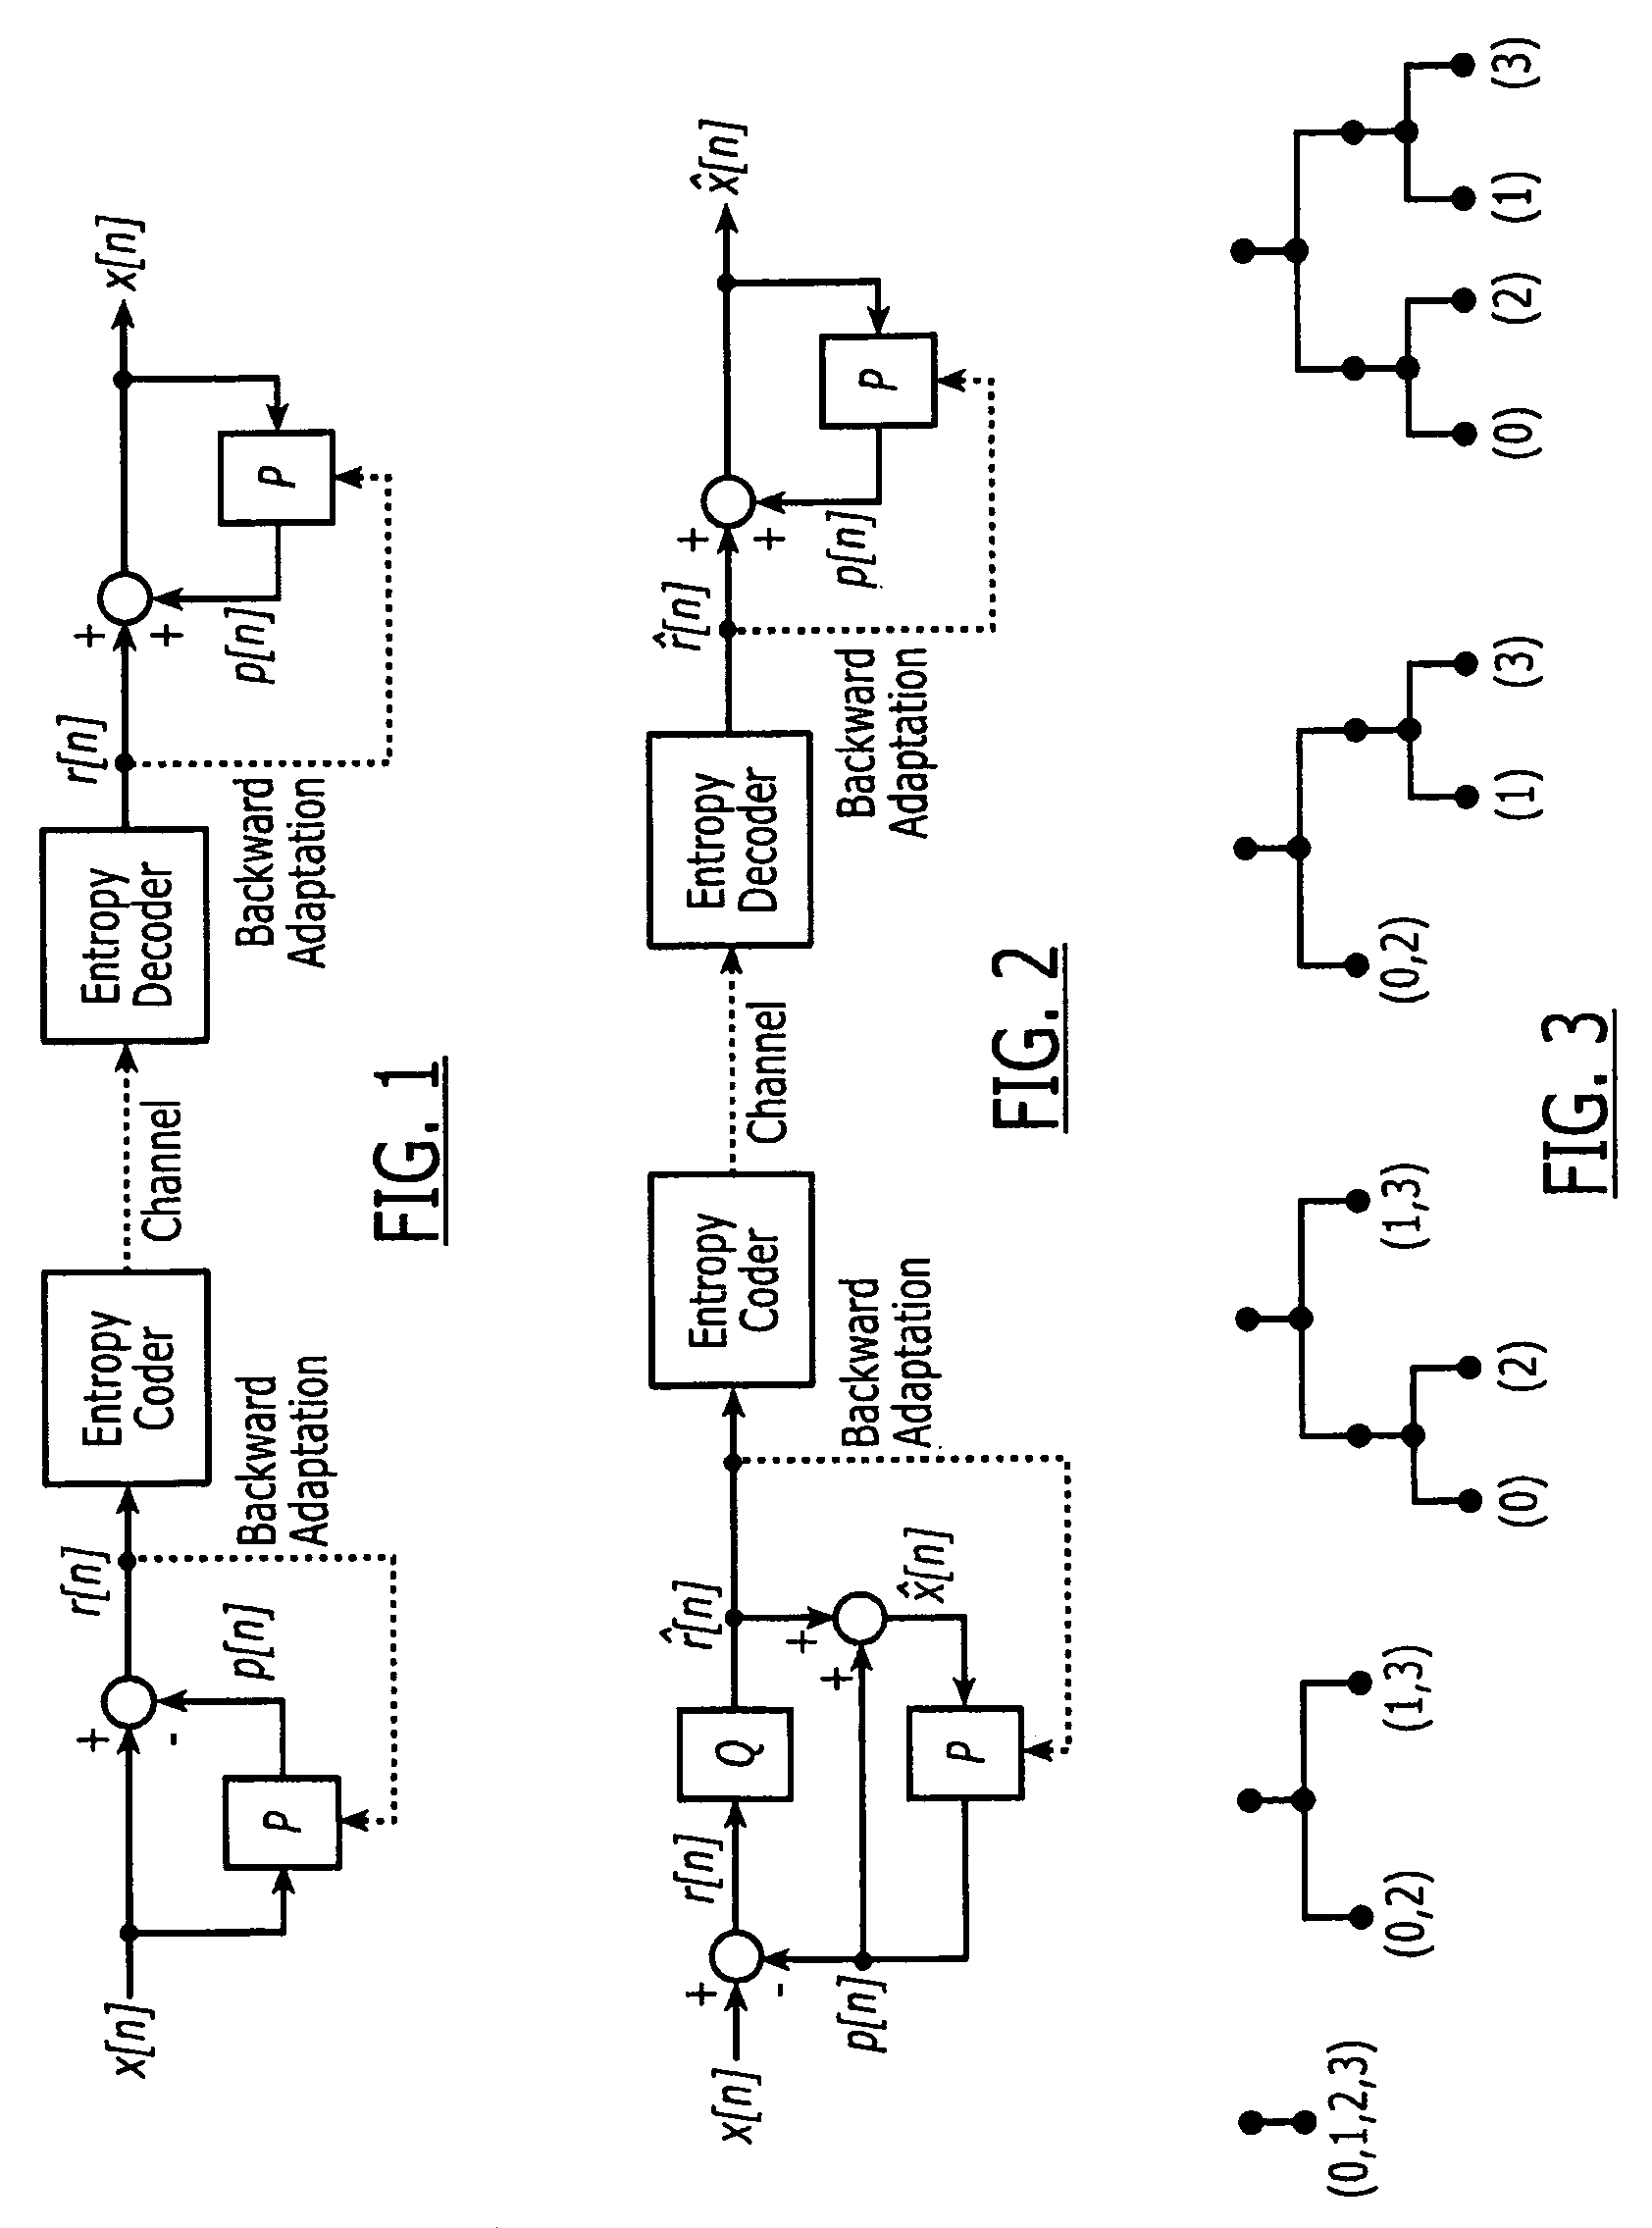 Method and computer program product for compressing time-multiplexed data and for estimating a frame structure of time-multiplexed data